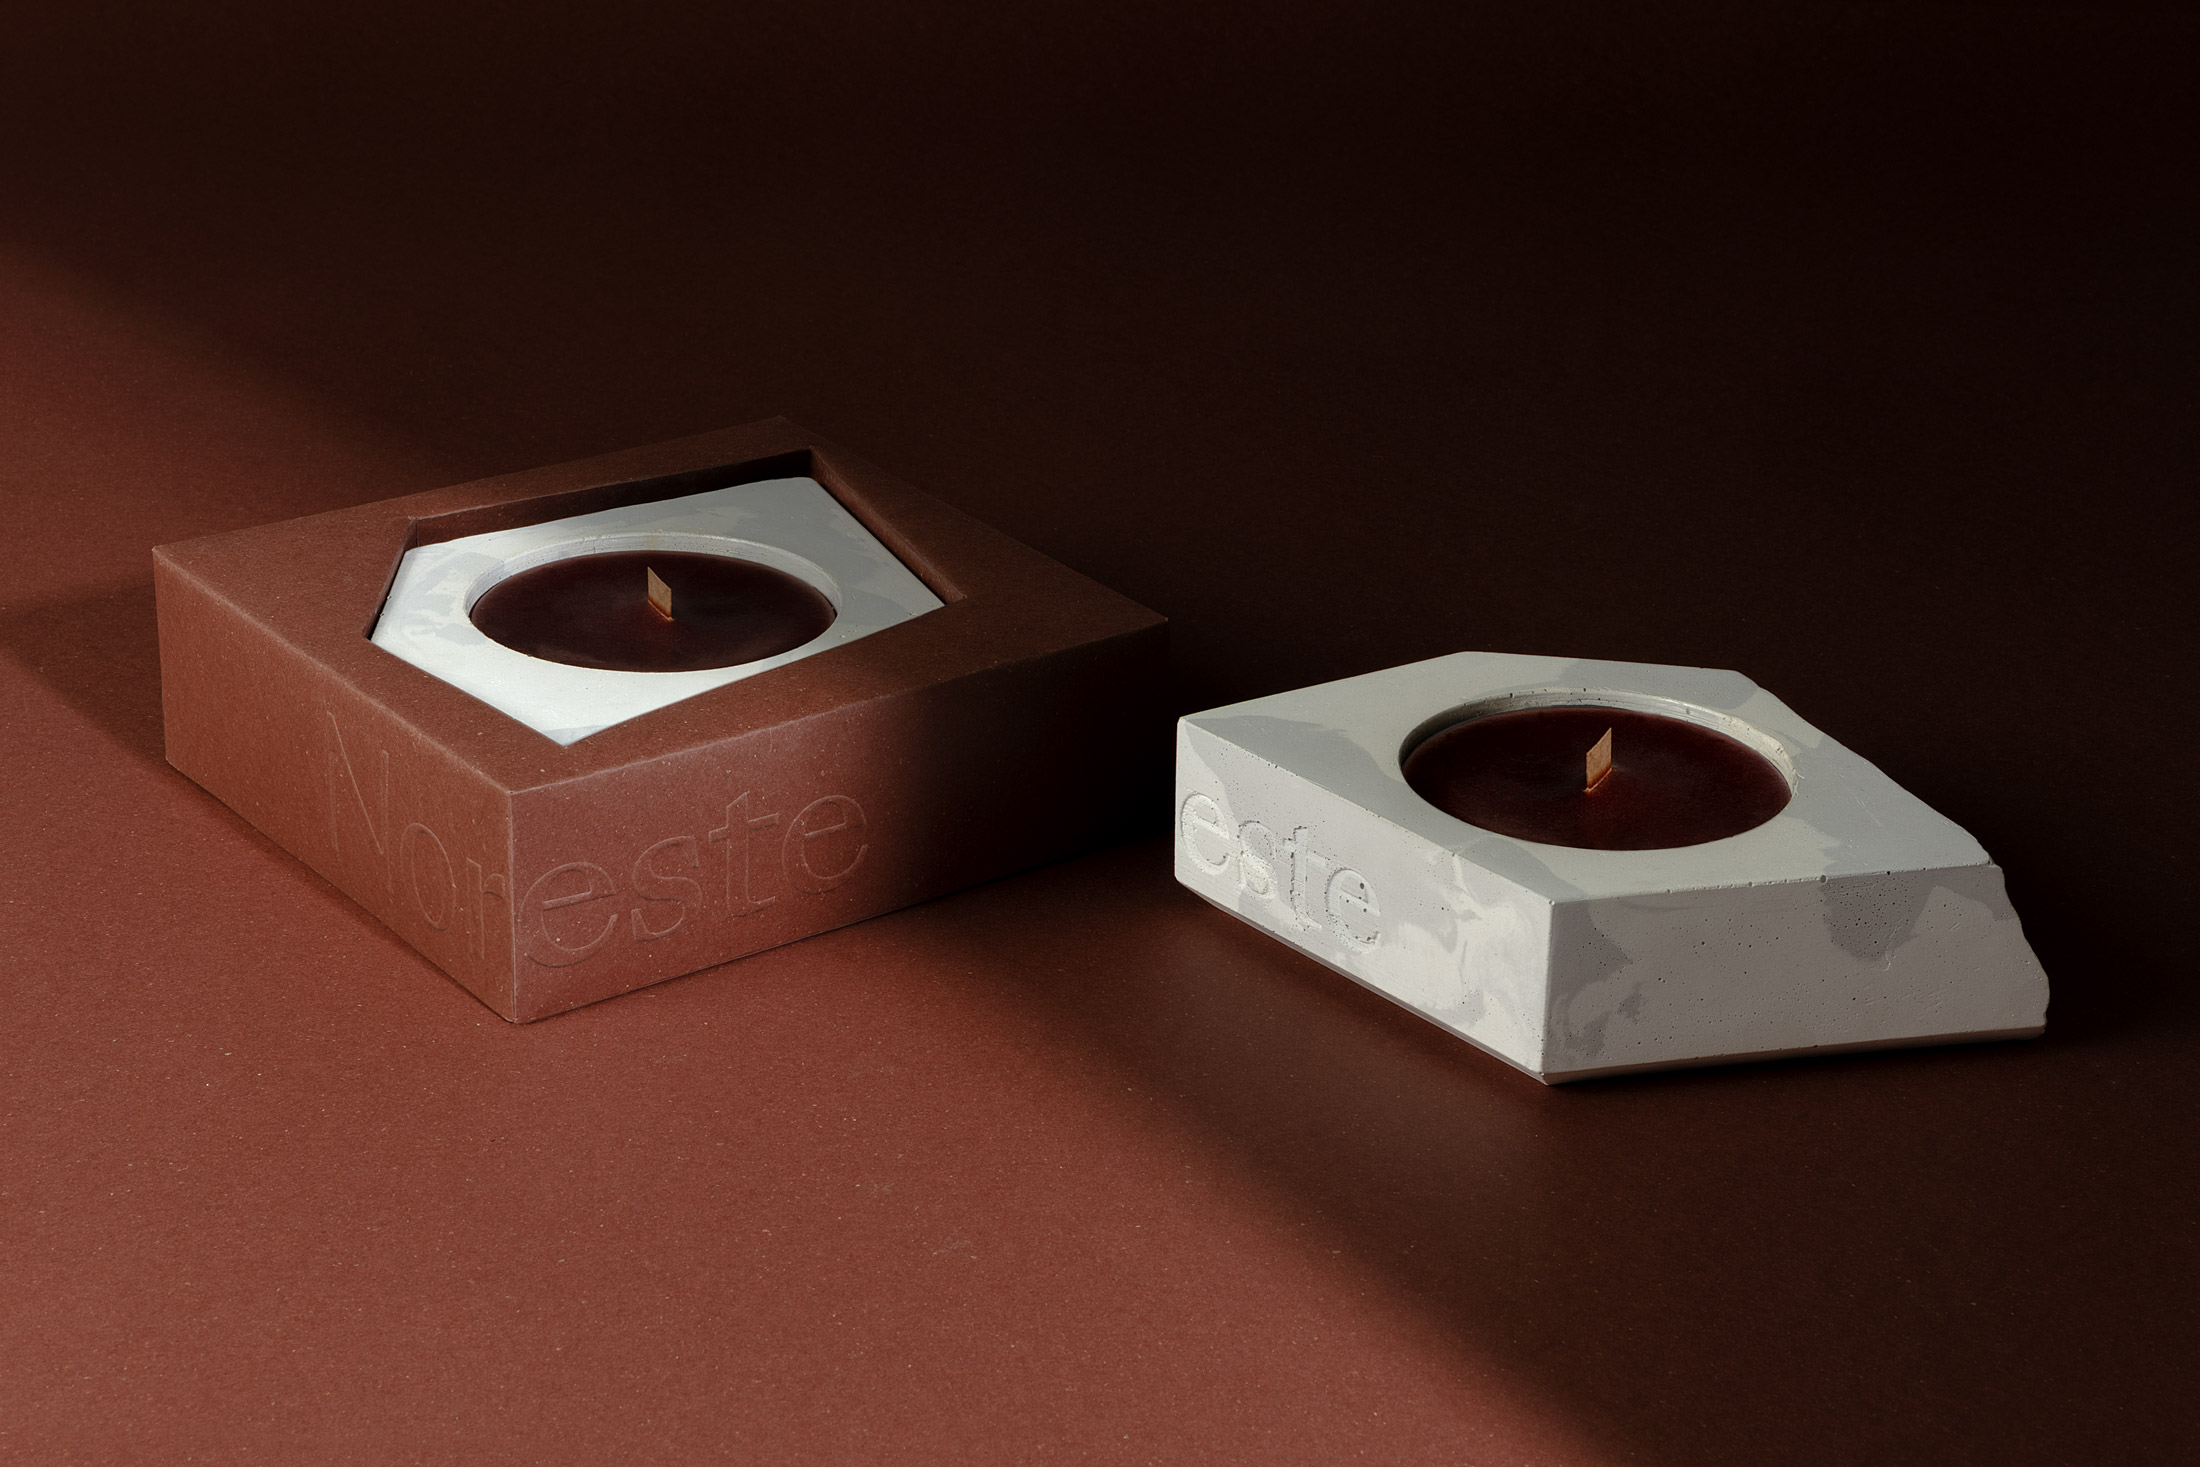 Recycled materials candle design self-promotion - Noreste Studio